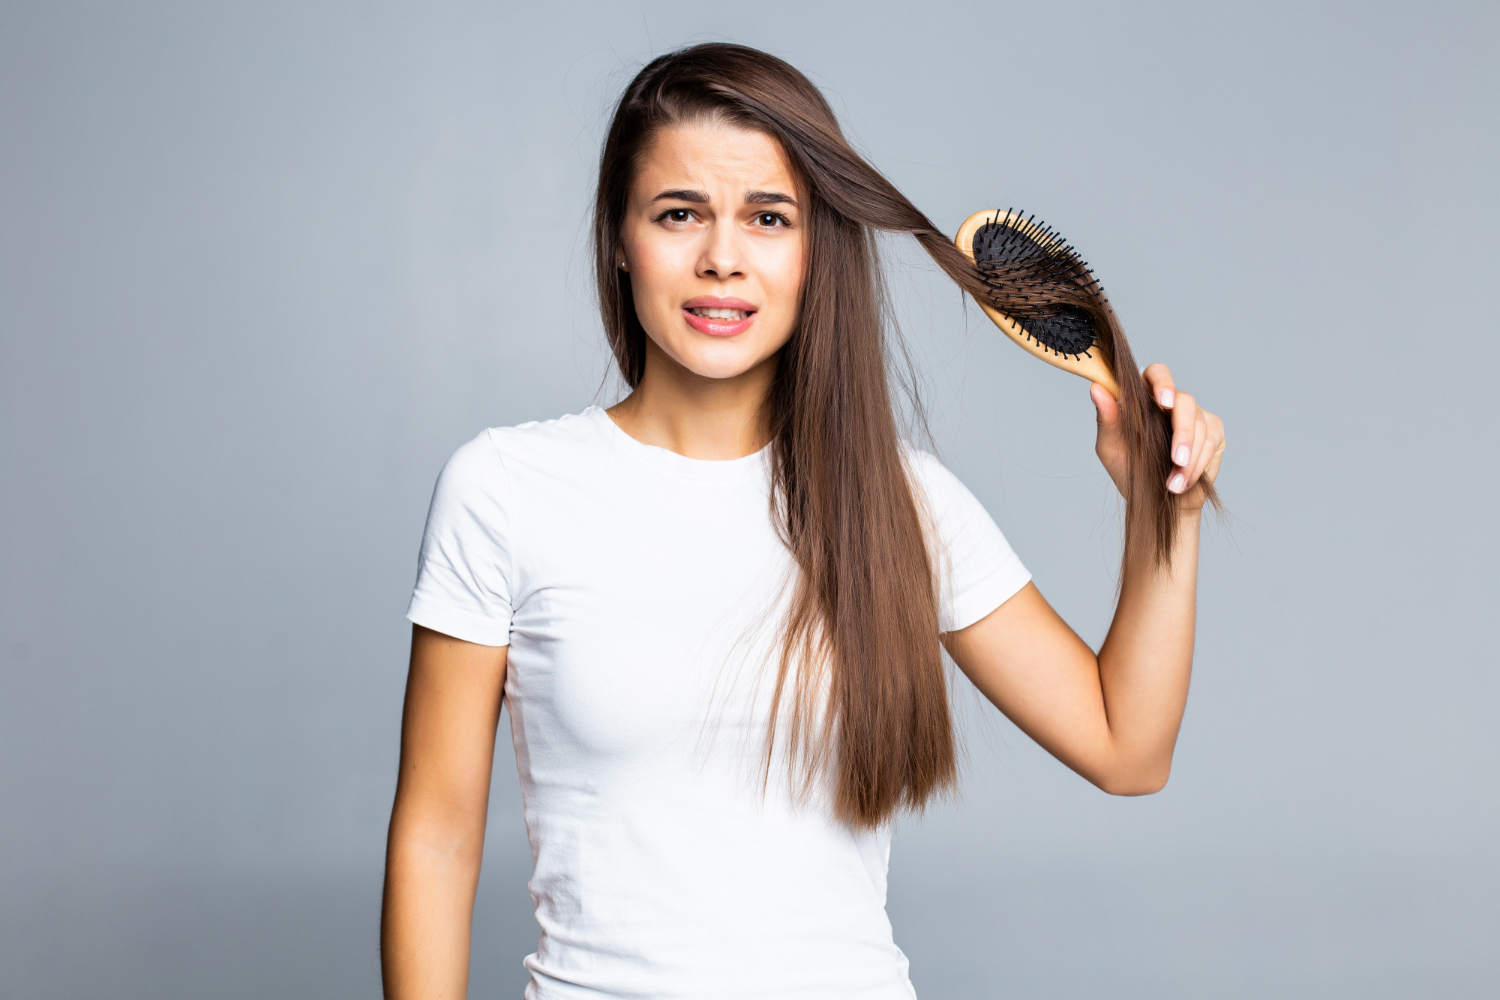 Hair Growth Cycle: Understanding & Solutions for Hair Loss